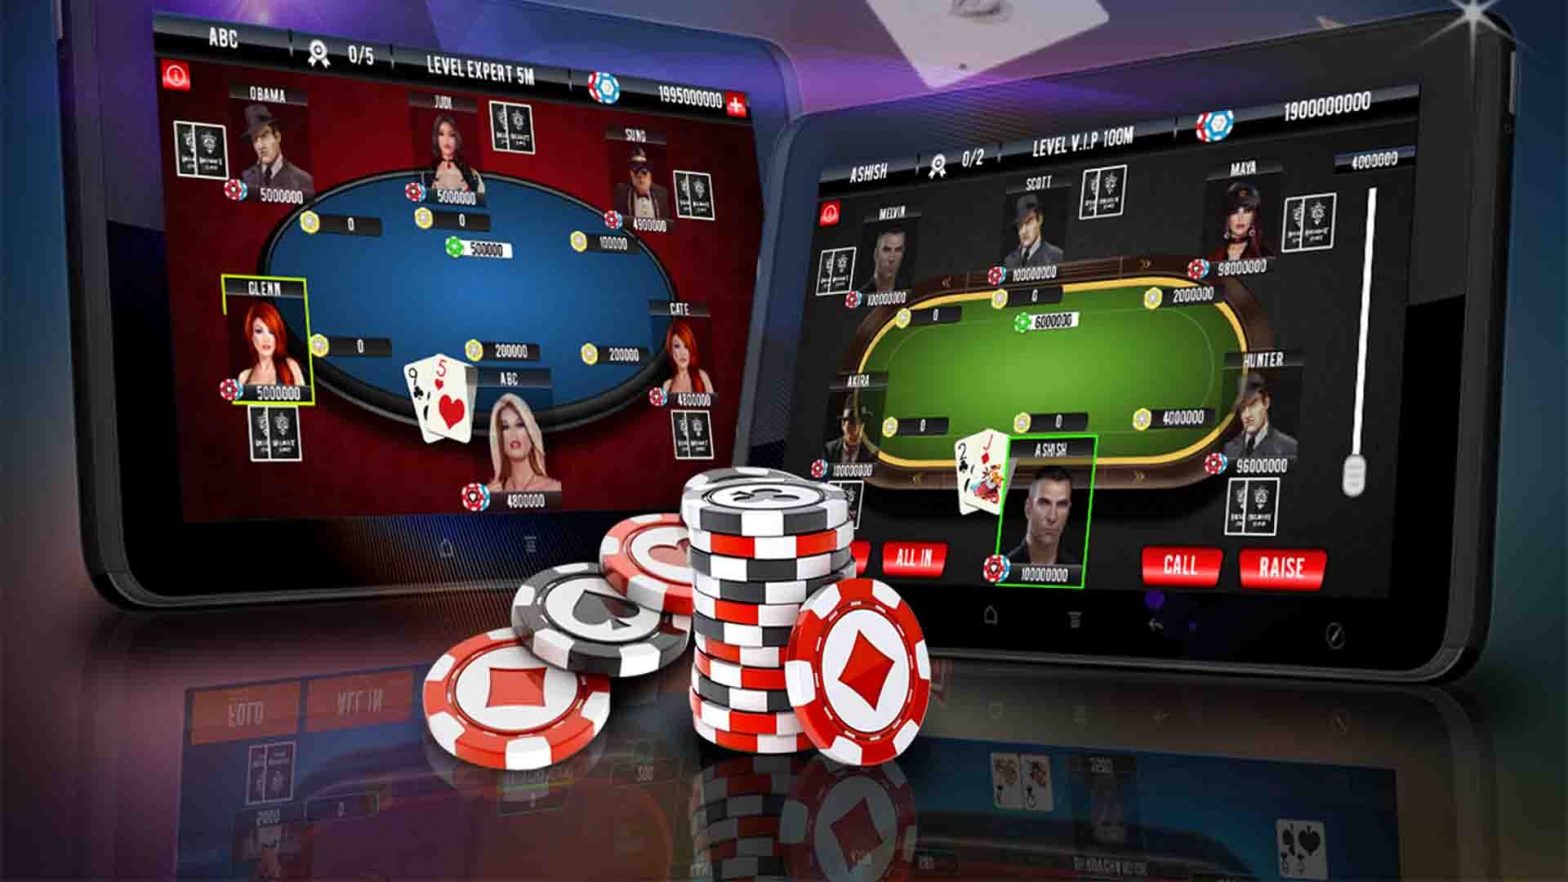 Psychology of Bluffing in Poker